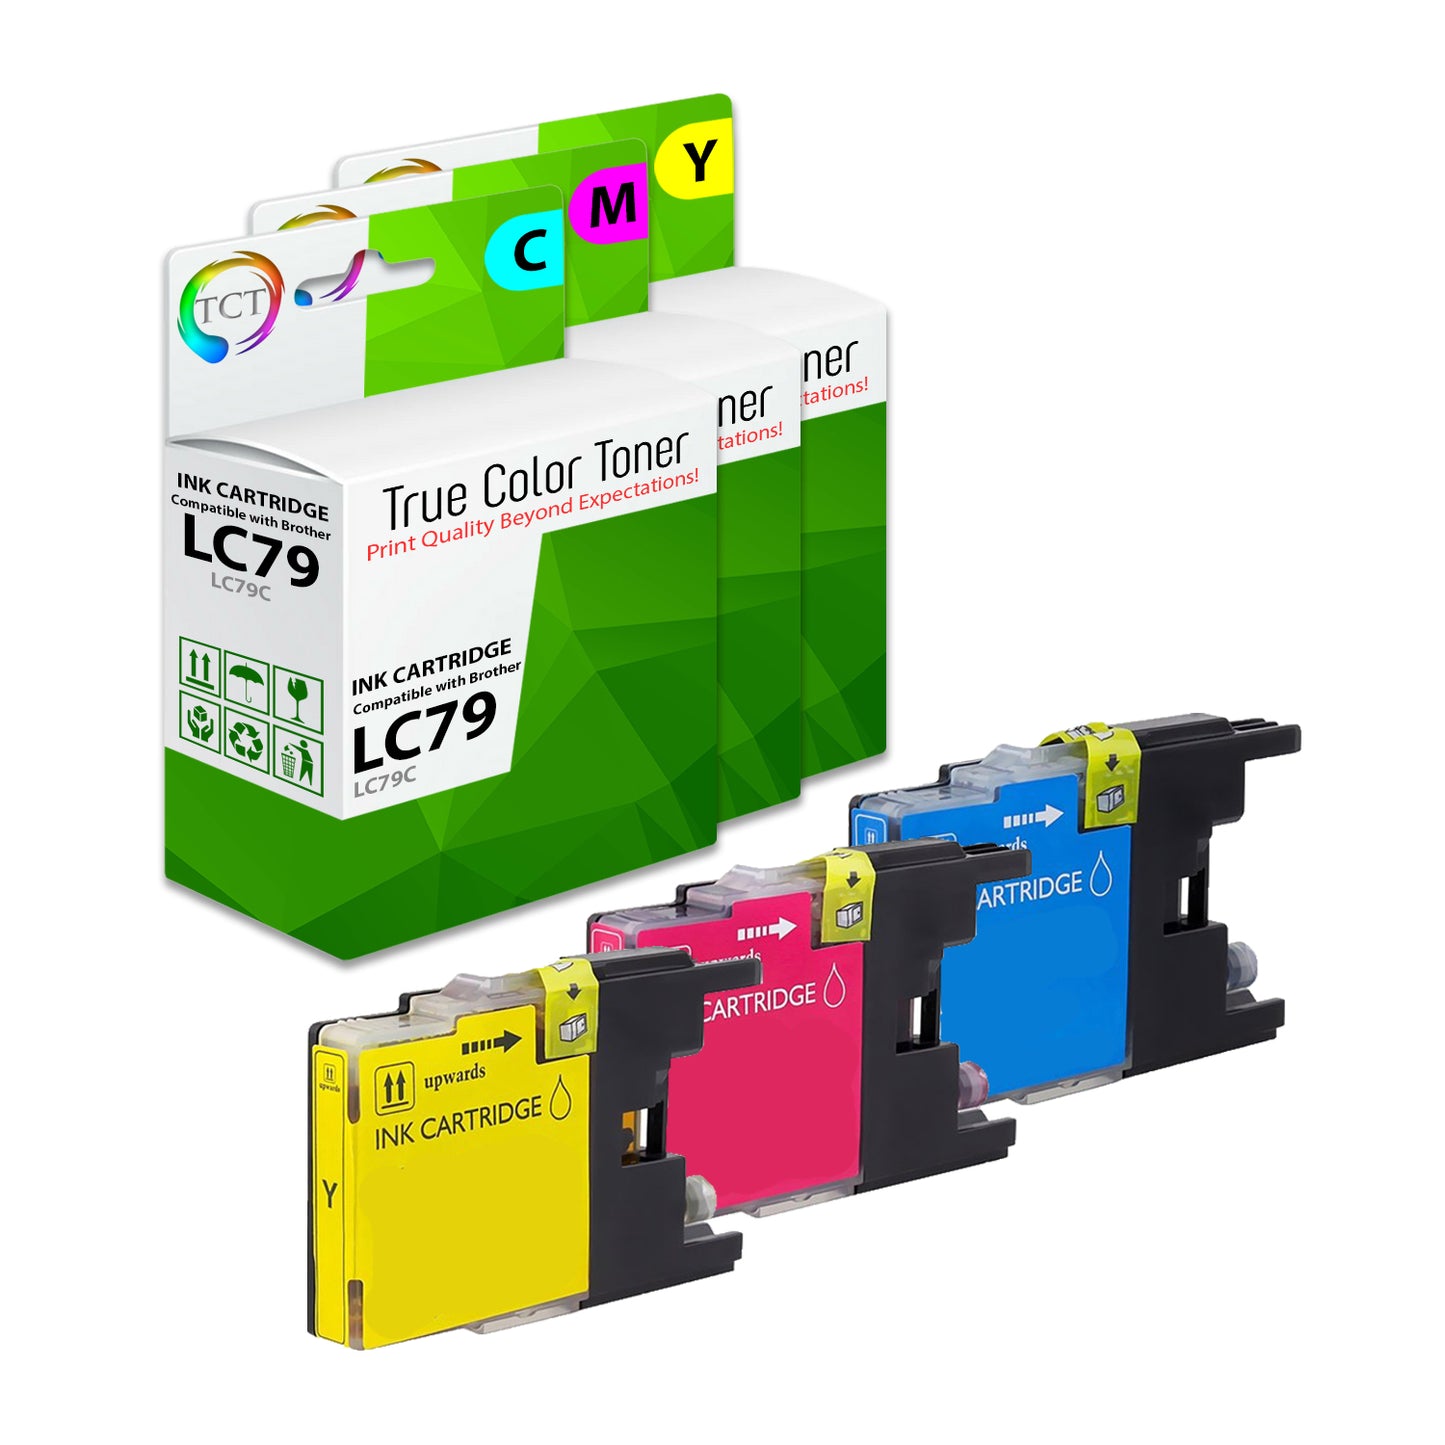 TCT Compatible Super HY Ink Cartridge Replacement for the Brother LC79 Series - 3 Pack (C, M, Y)